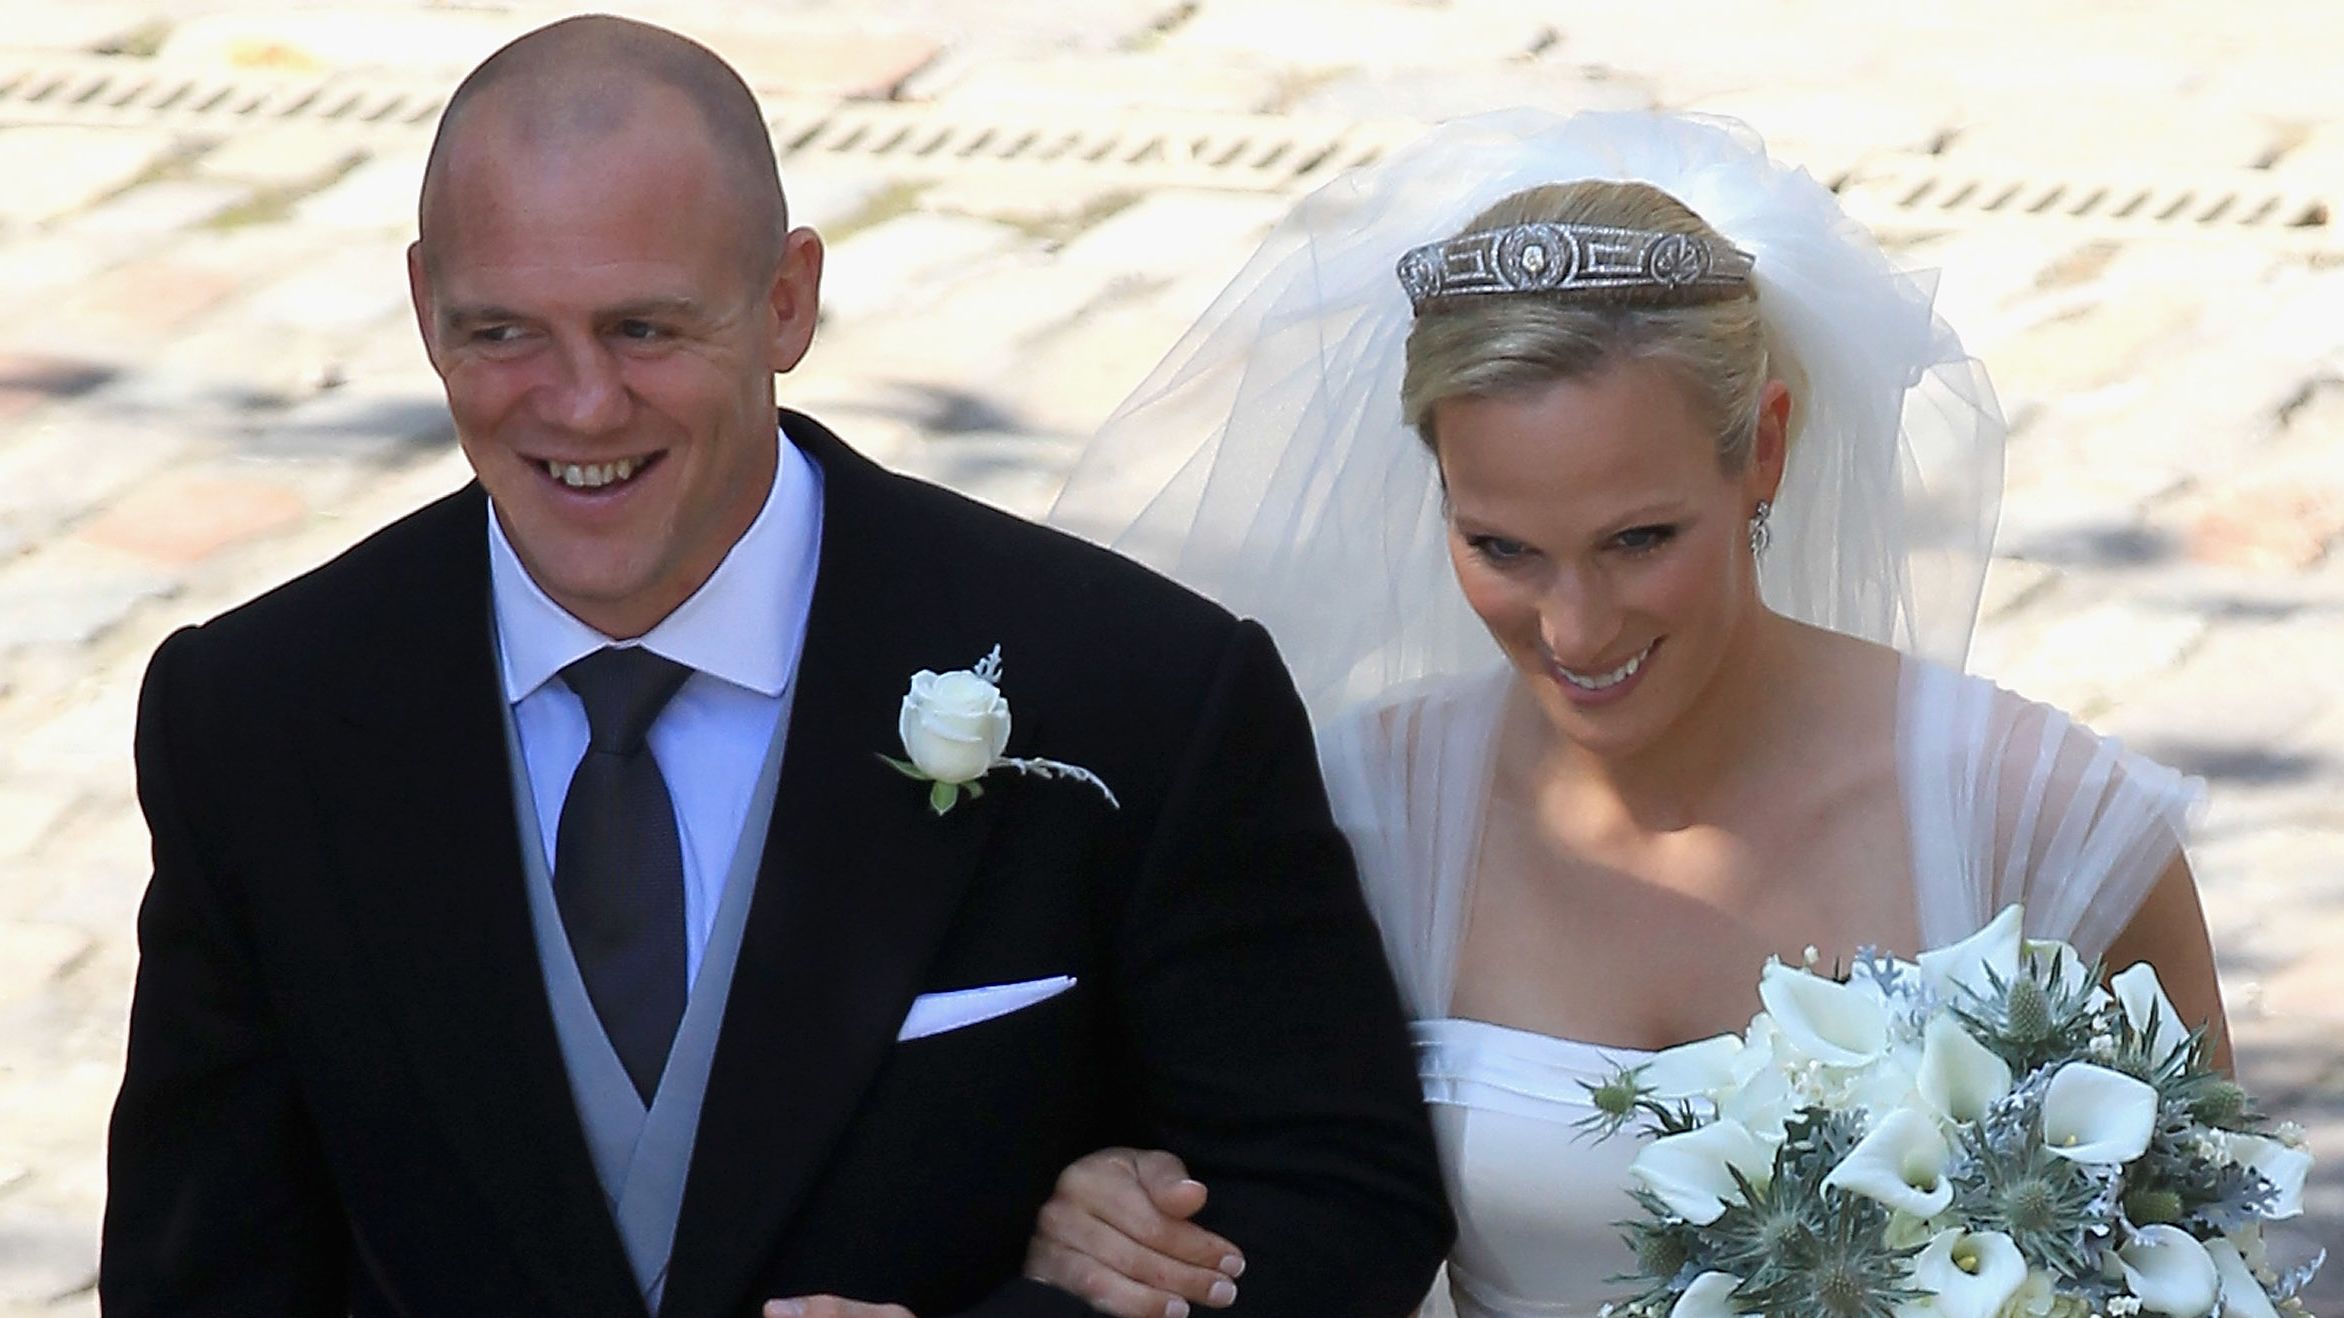 Zara Philips and Mike Tindall leave Canongate Kirk after getting married on July 30, 2011, in Edinburgh, Scotland.